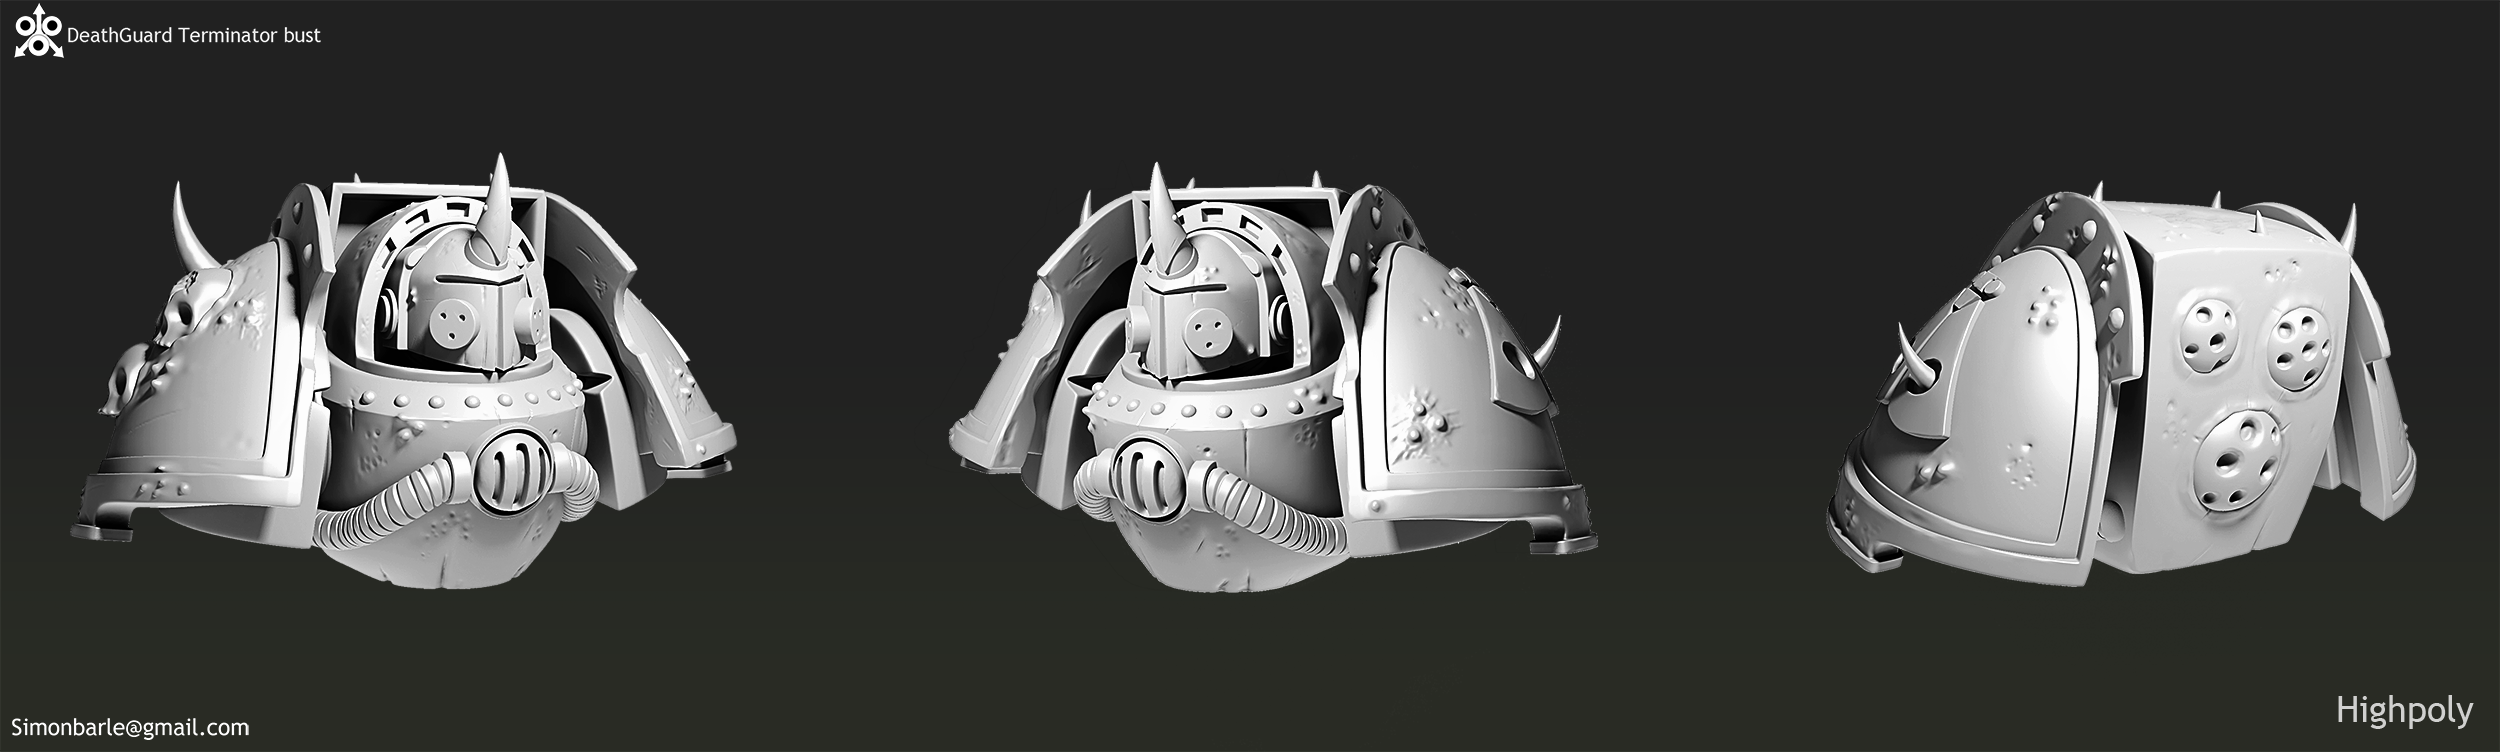 DeathGuard_Highpoly.png